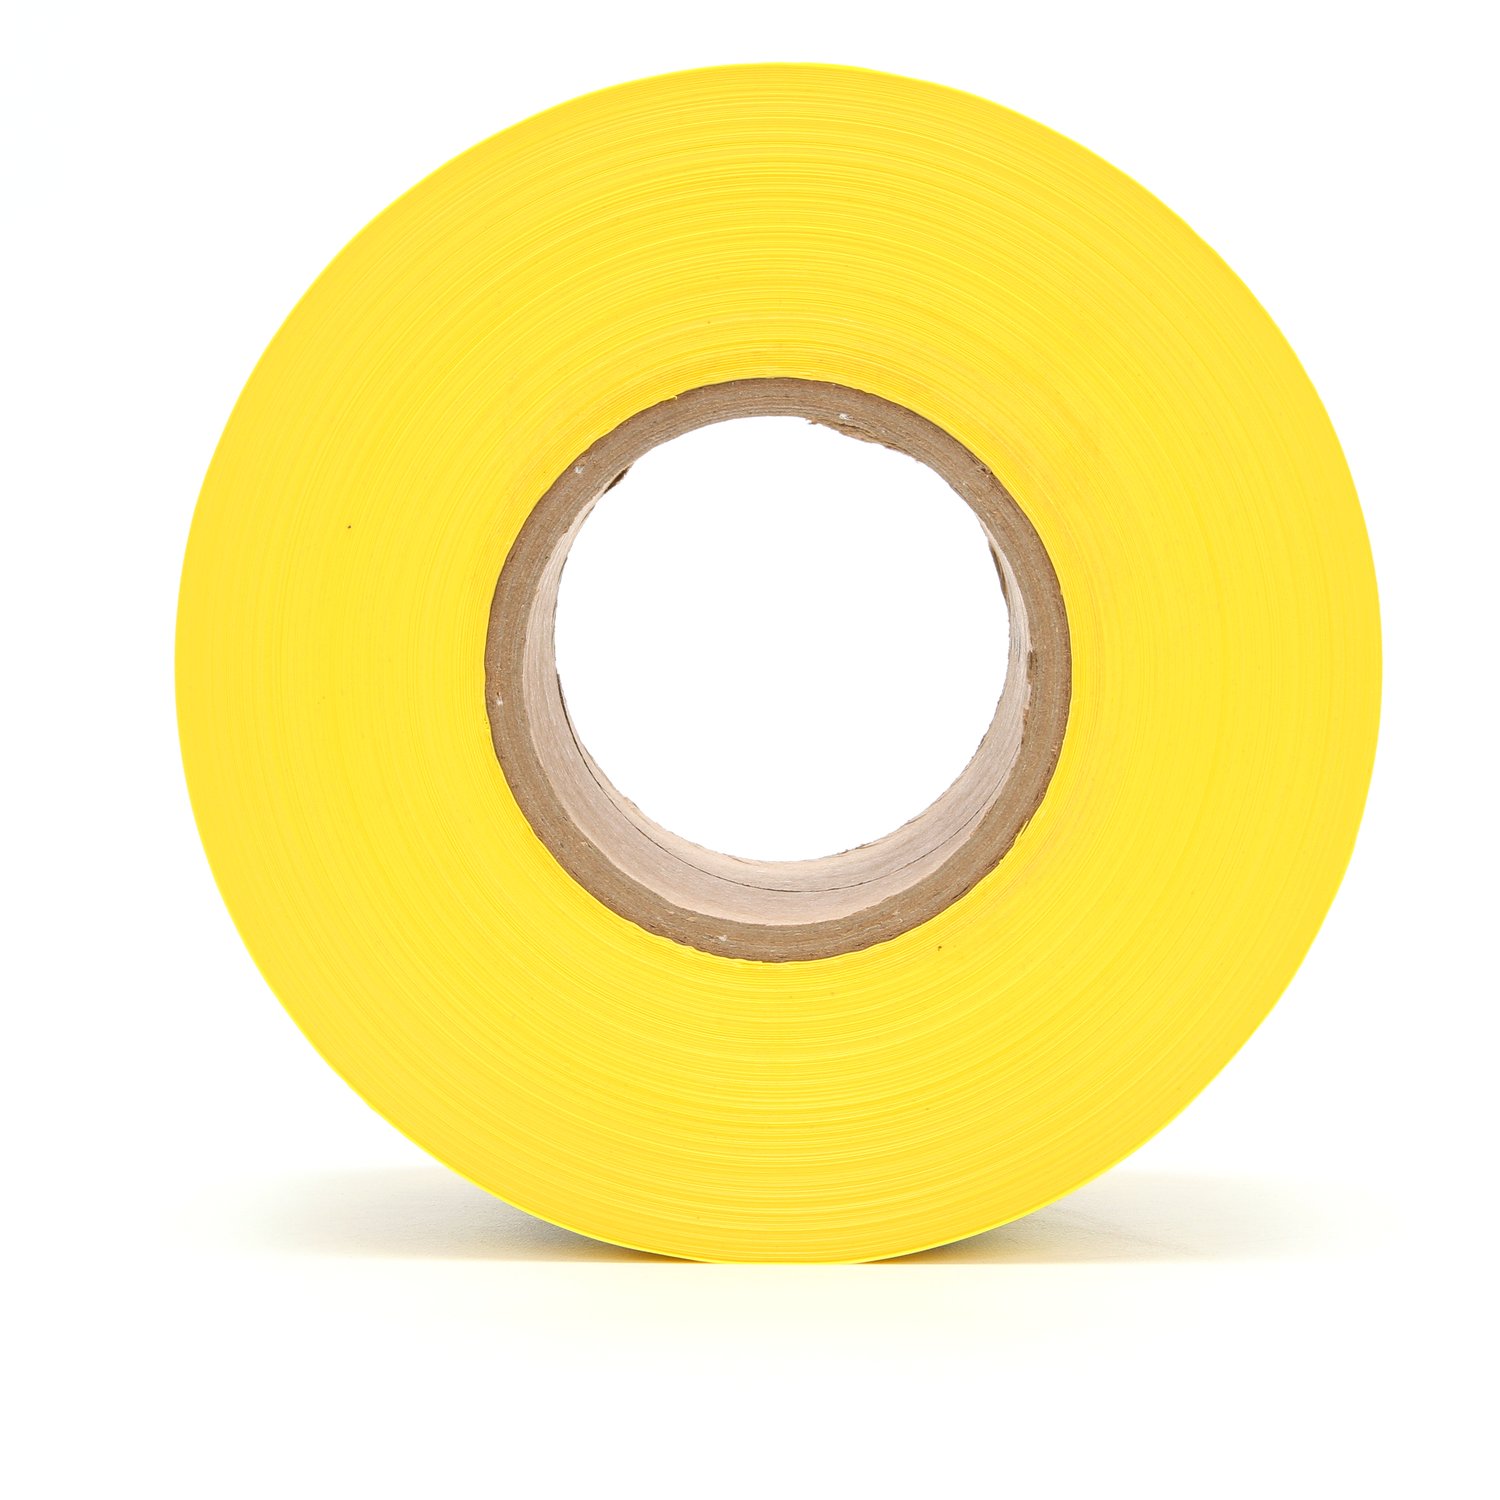 7010398057 - Scotch Barricade Tape 333, CAUTION DO NOT ENTER, 3 in x 1000 ft,
Yellow, 8 rolls/Case